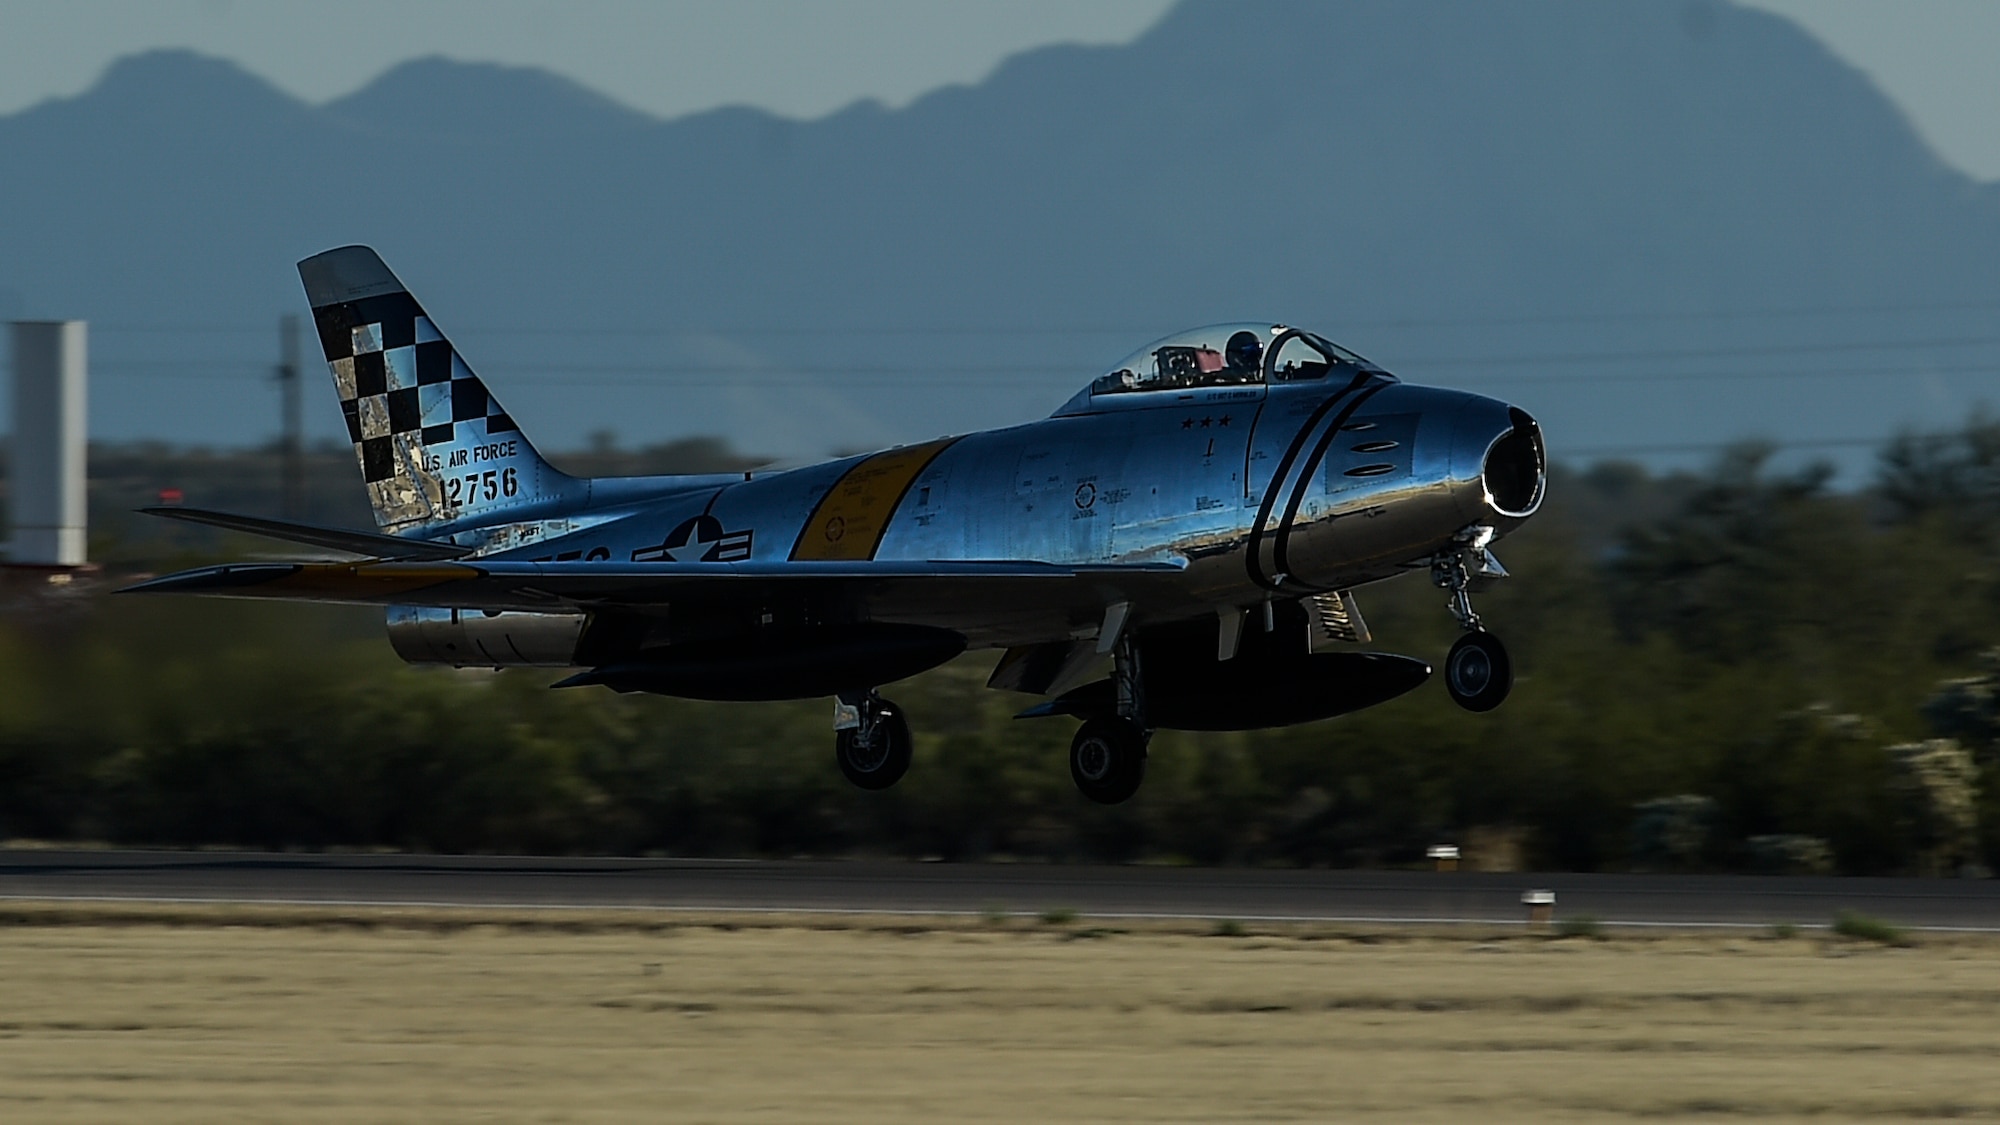 An F-86 Sabre takes off during the 2017 Heritage Flight Training and Certification Course at Davis-Monthan Air Force Base, Ariz., Feb. 10, 2017. The first production model of the F-86 flew in 1948 and supported the Strategic Air Command from 1949 to 1950. (U.S. Air Force photo by Senior Airman Chris Drzazgowski)